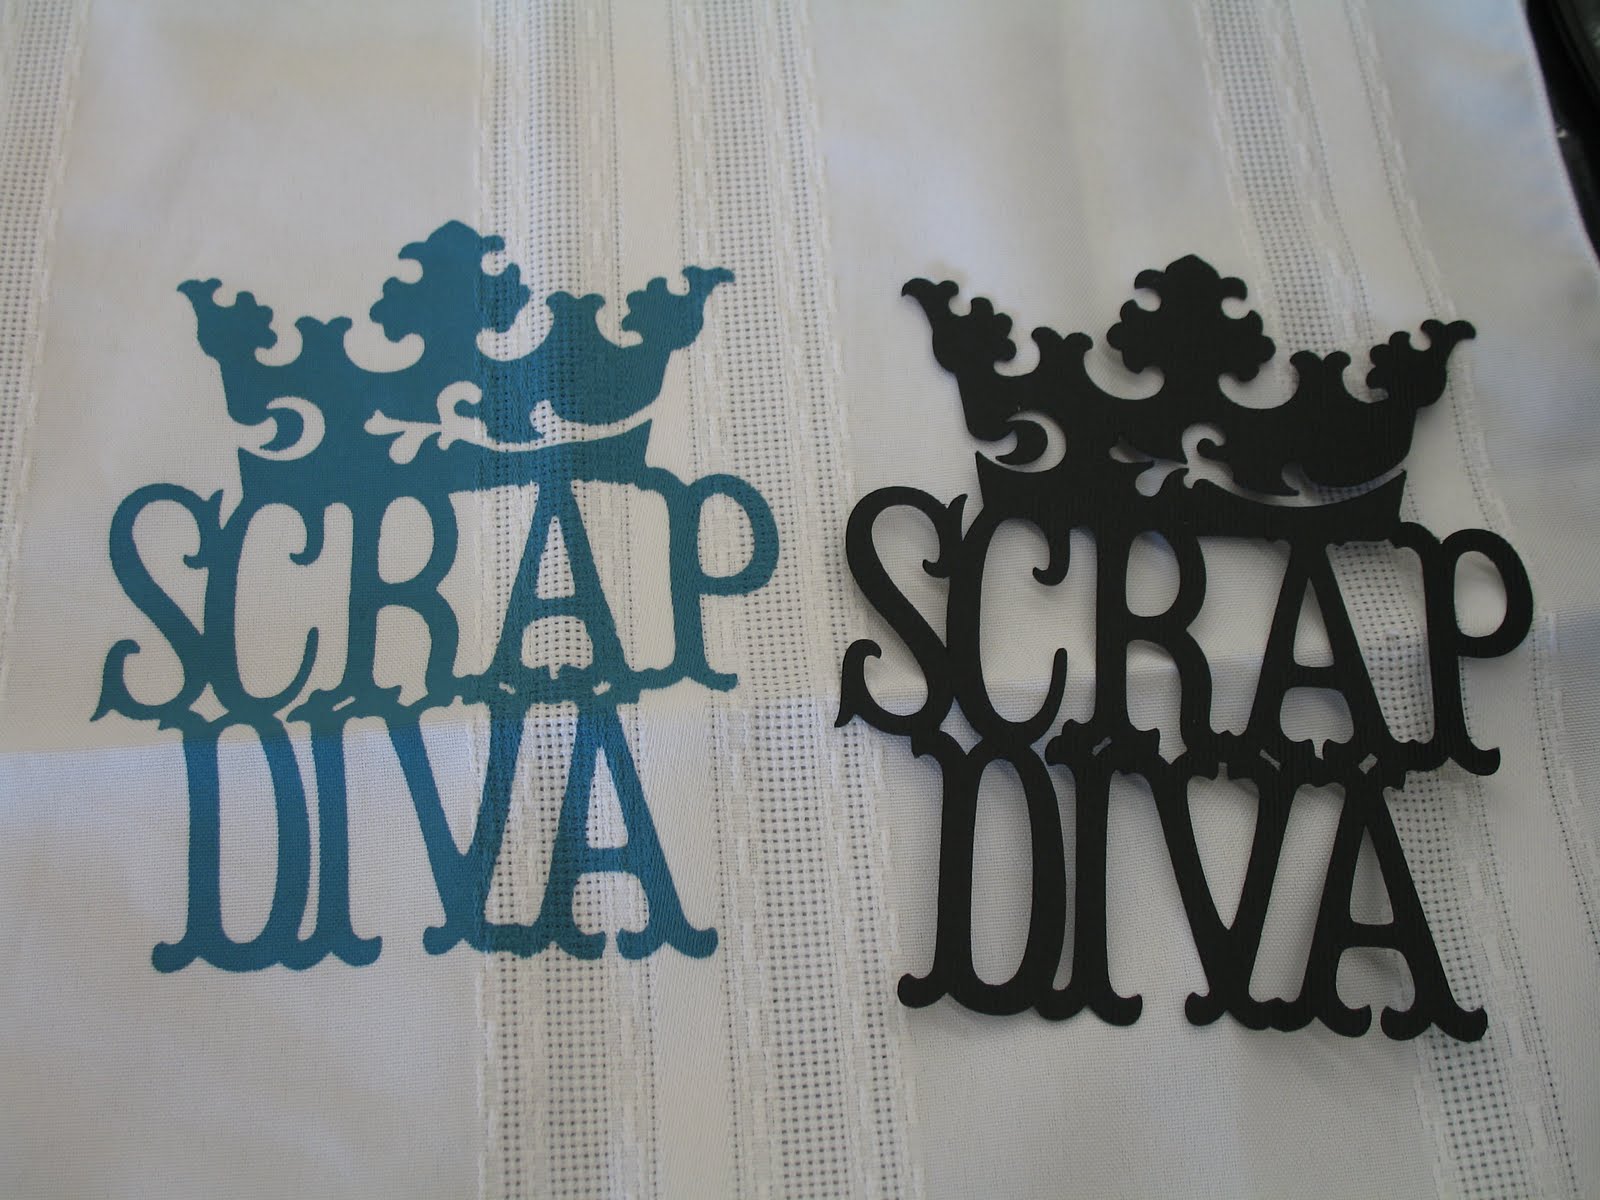 The Cricut cartridges that I used were Storybook and Wall Decor and ...